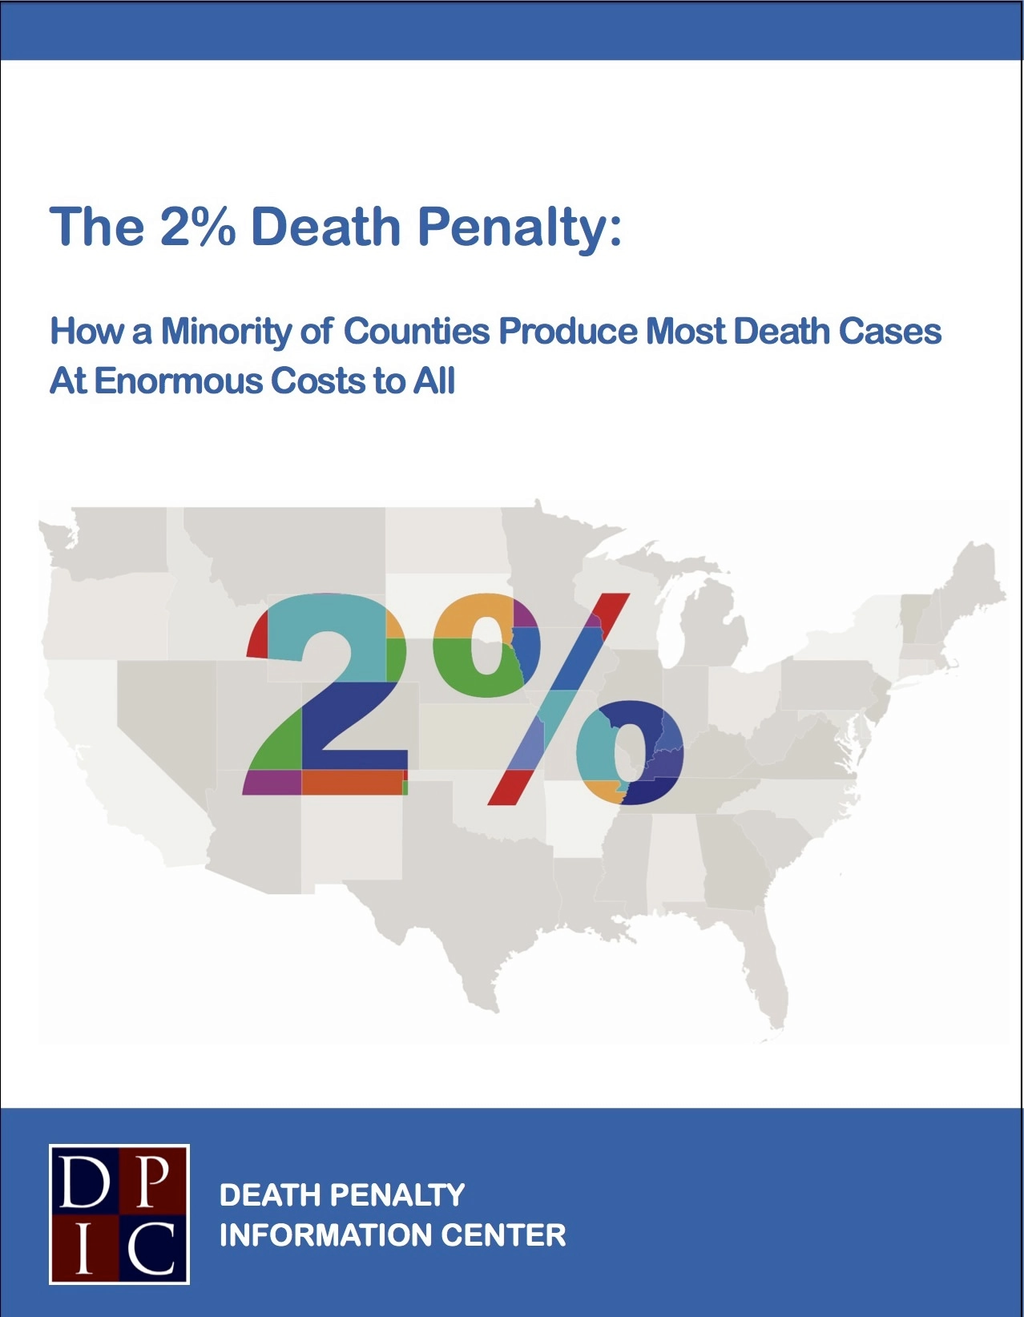 The 2% Death Penalty: How a Minority of Counties Produce Most Death Cases at Enormous Costs to All